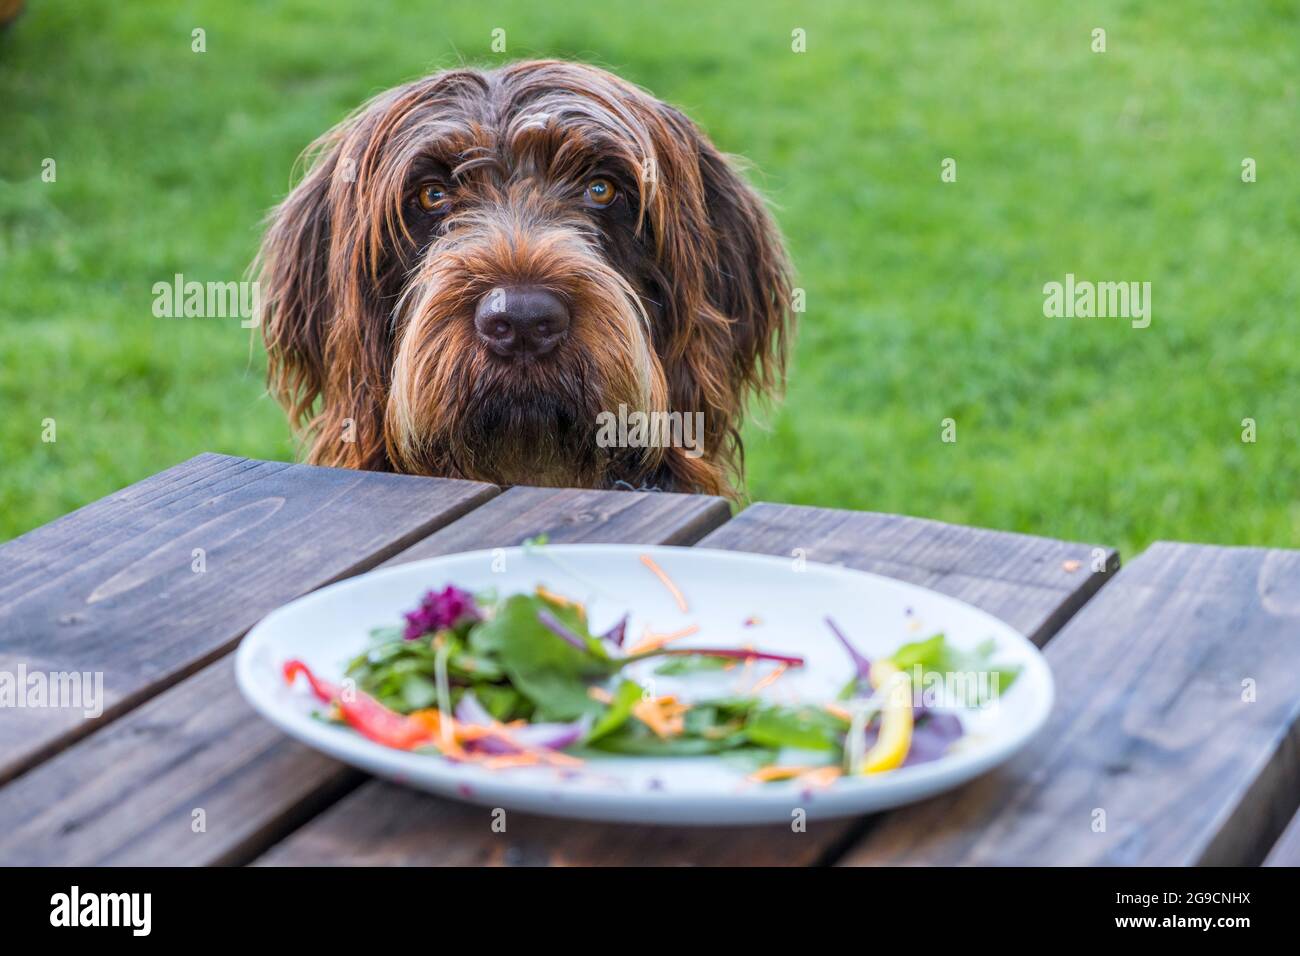 A Griffon Korthals dog with a pleading or guilty look. A plate with the remains of a salad and no meat in the foreground. Stock Photo